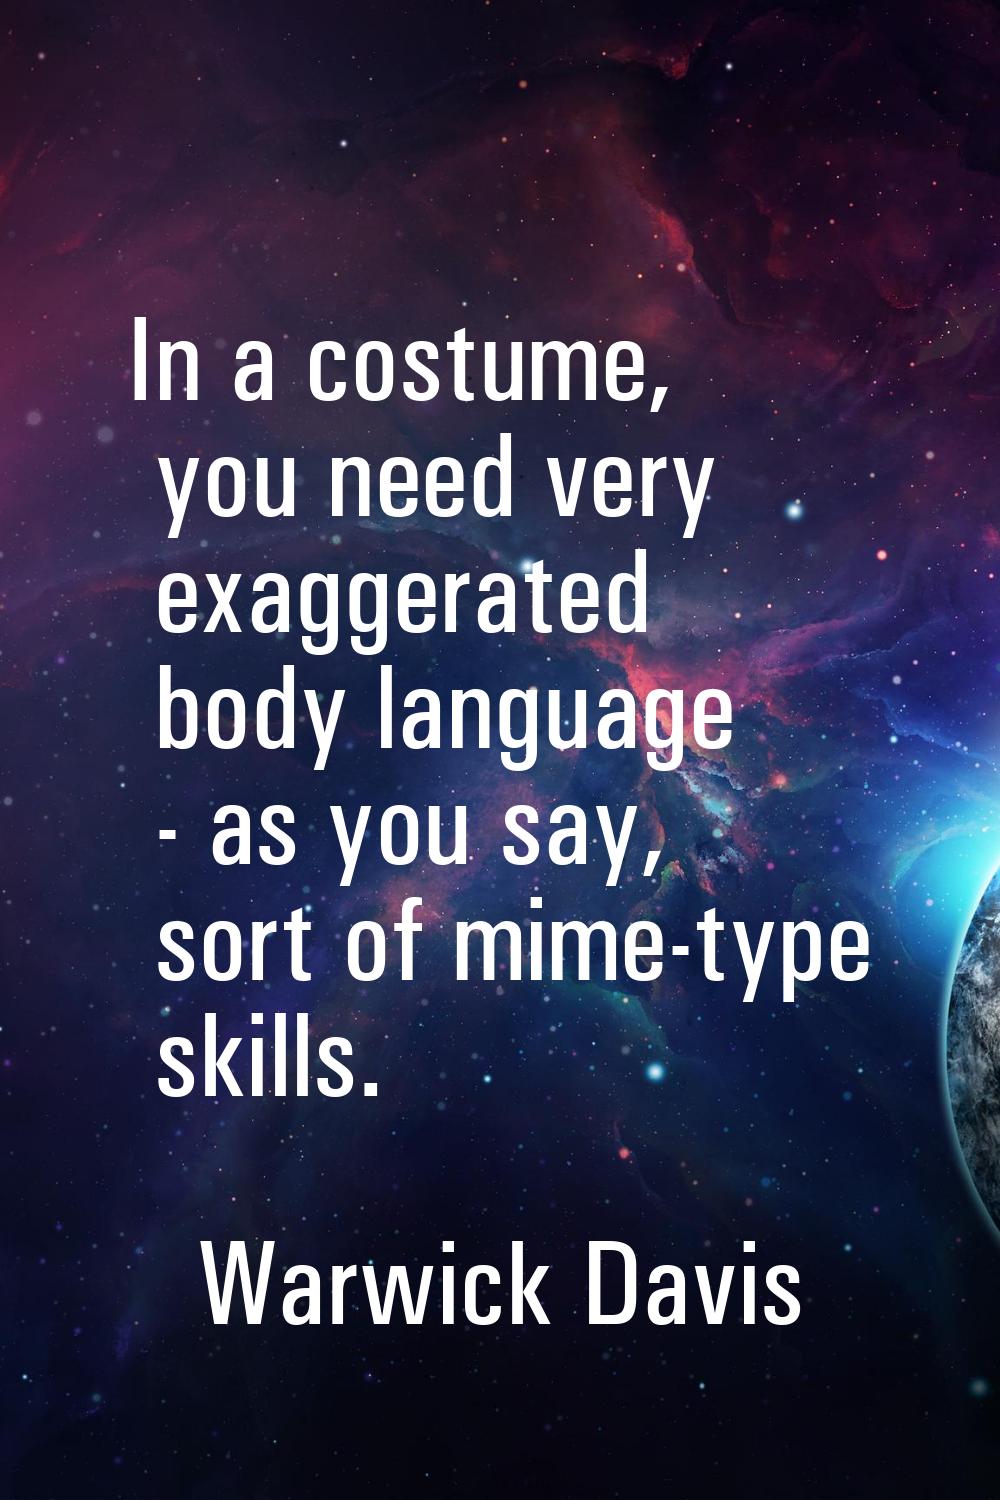 In a costume, you need very exaggerated body language - as you say, sort of mime-type skills.